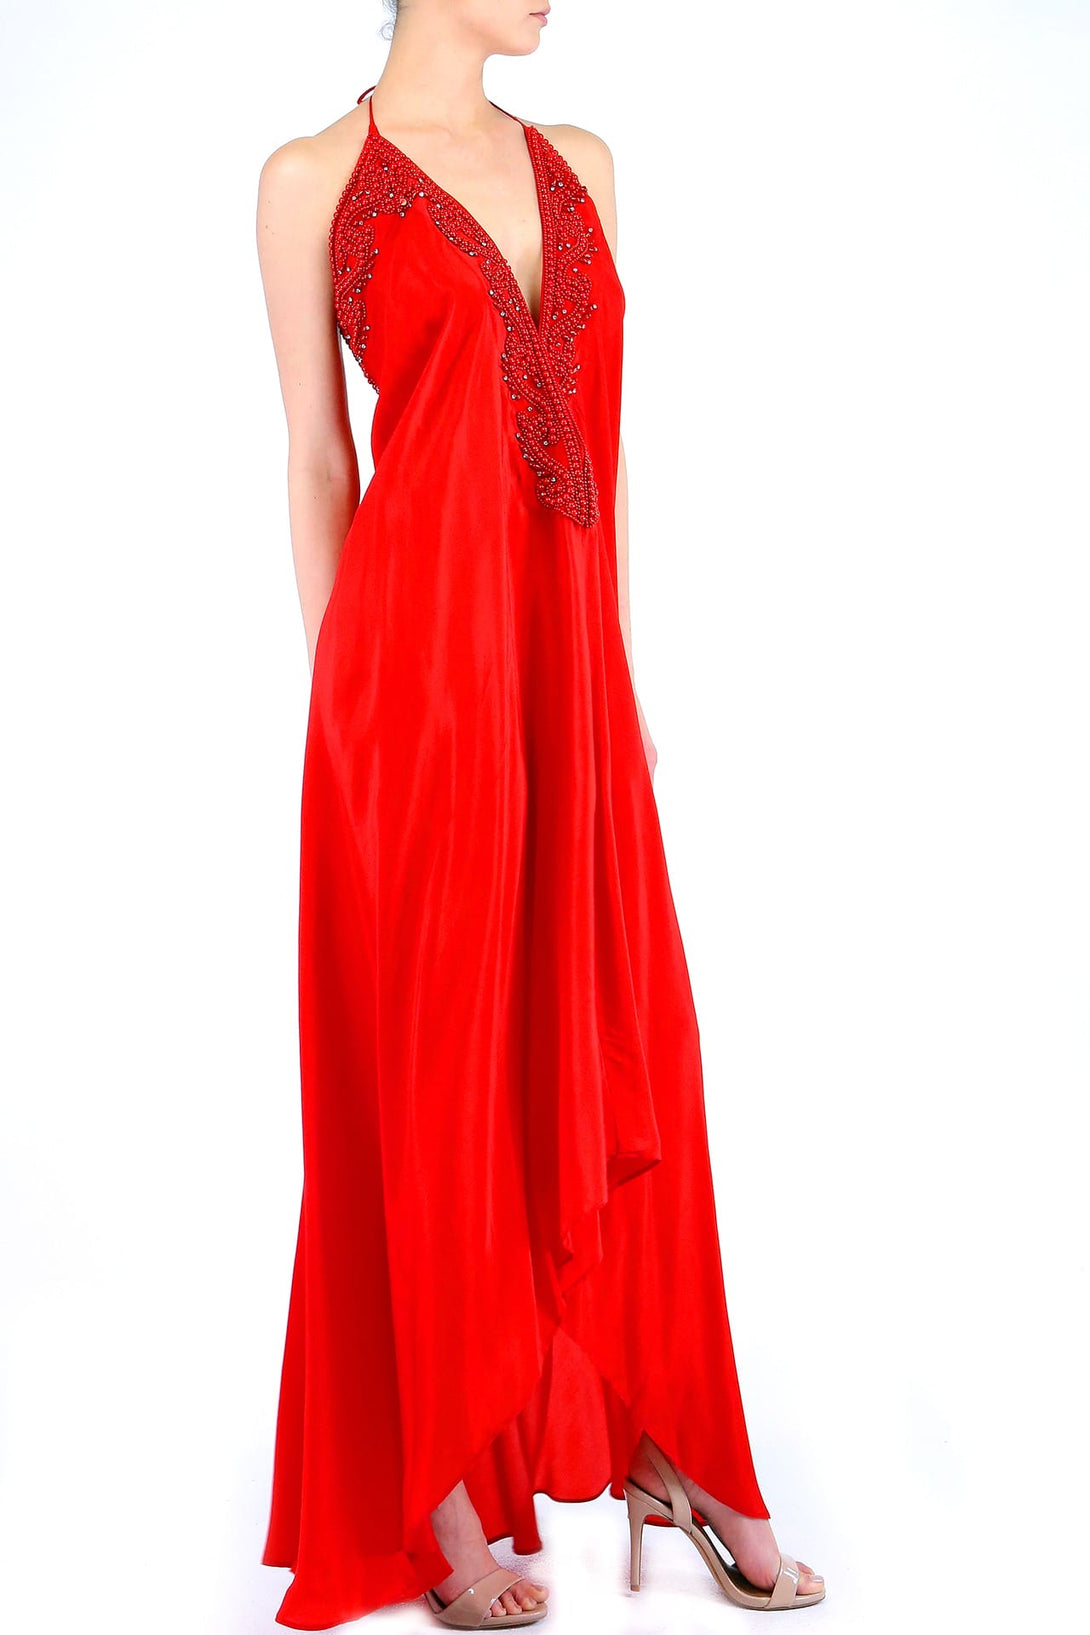  red casual dress, summer maxi dresses for women, plunging v neck formal dress,